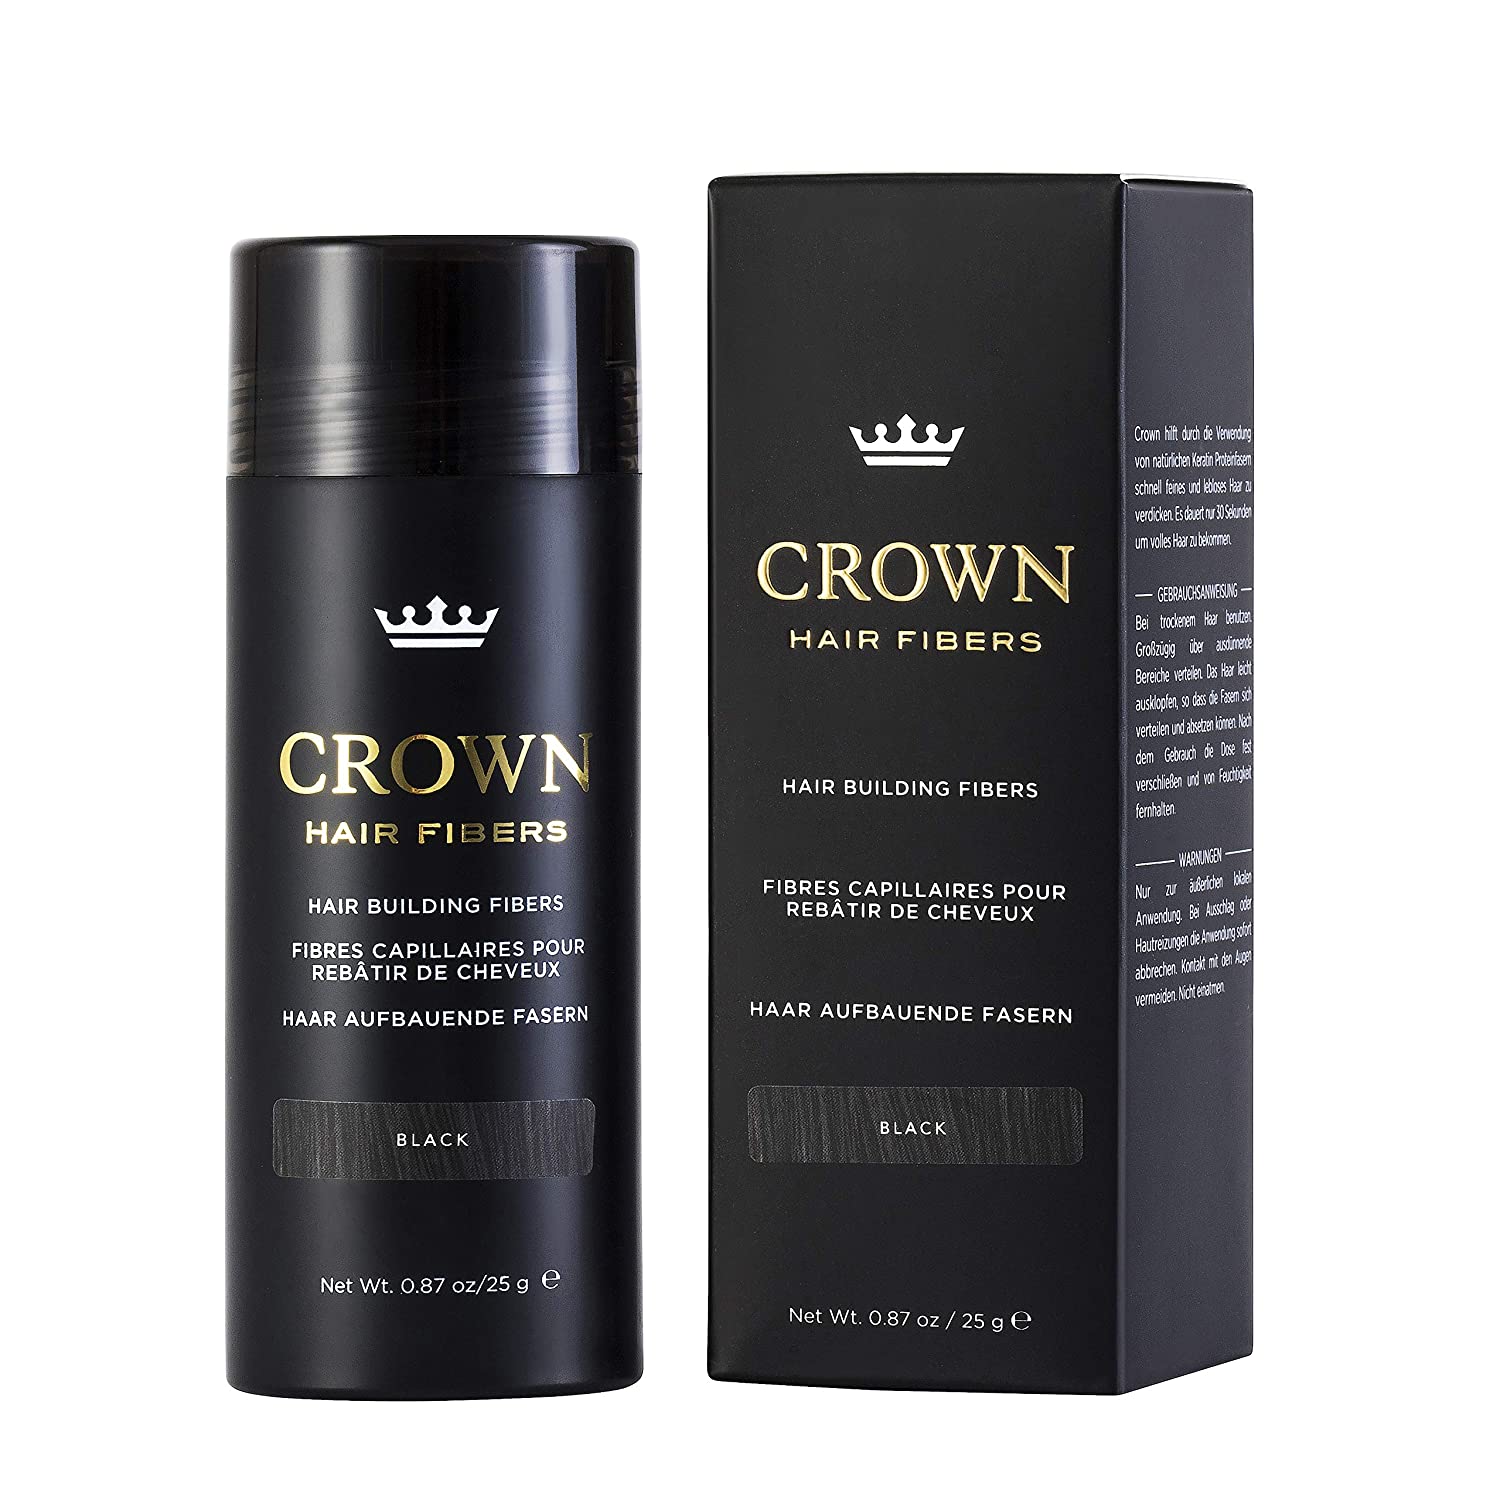 CROWN Hypoallergenic Keratin Hair Fibers For Thinning Hair